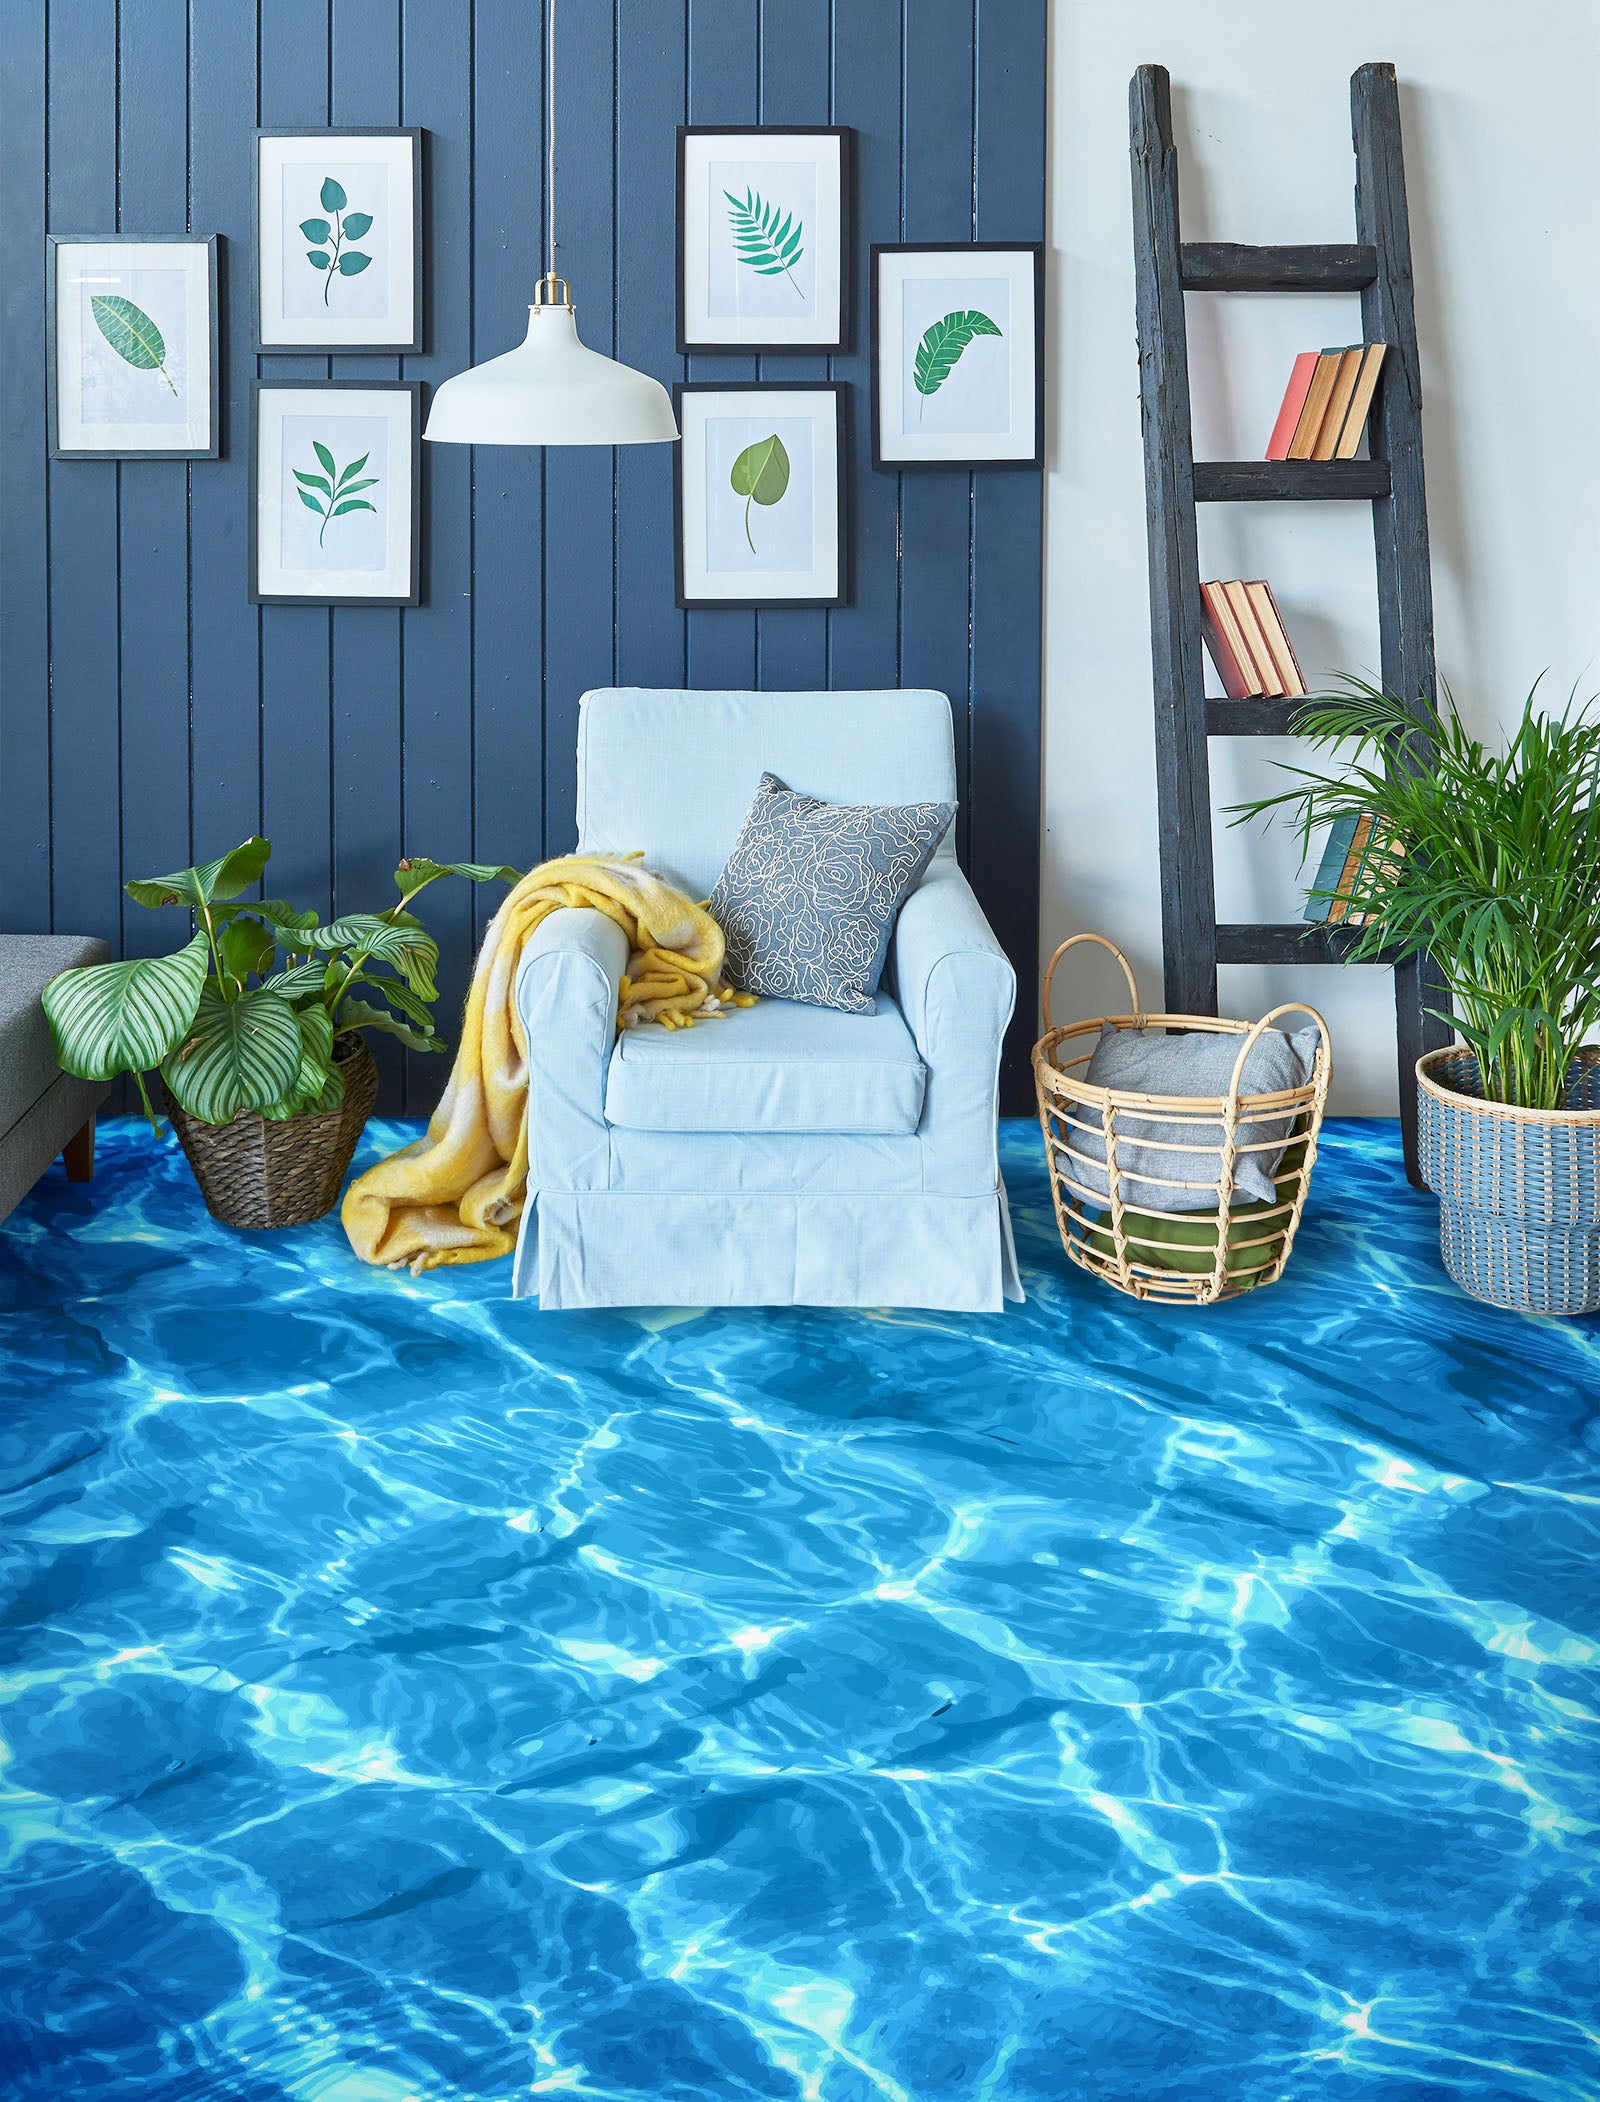 3D Blue Pond Water 1436 Floor Mural  Wallpaper Murals Self-Adhesive Removable Print Epoxy